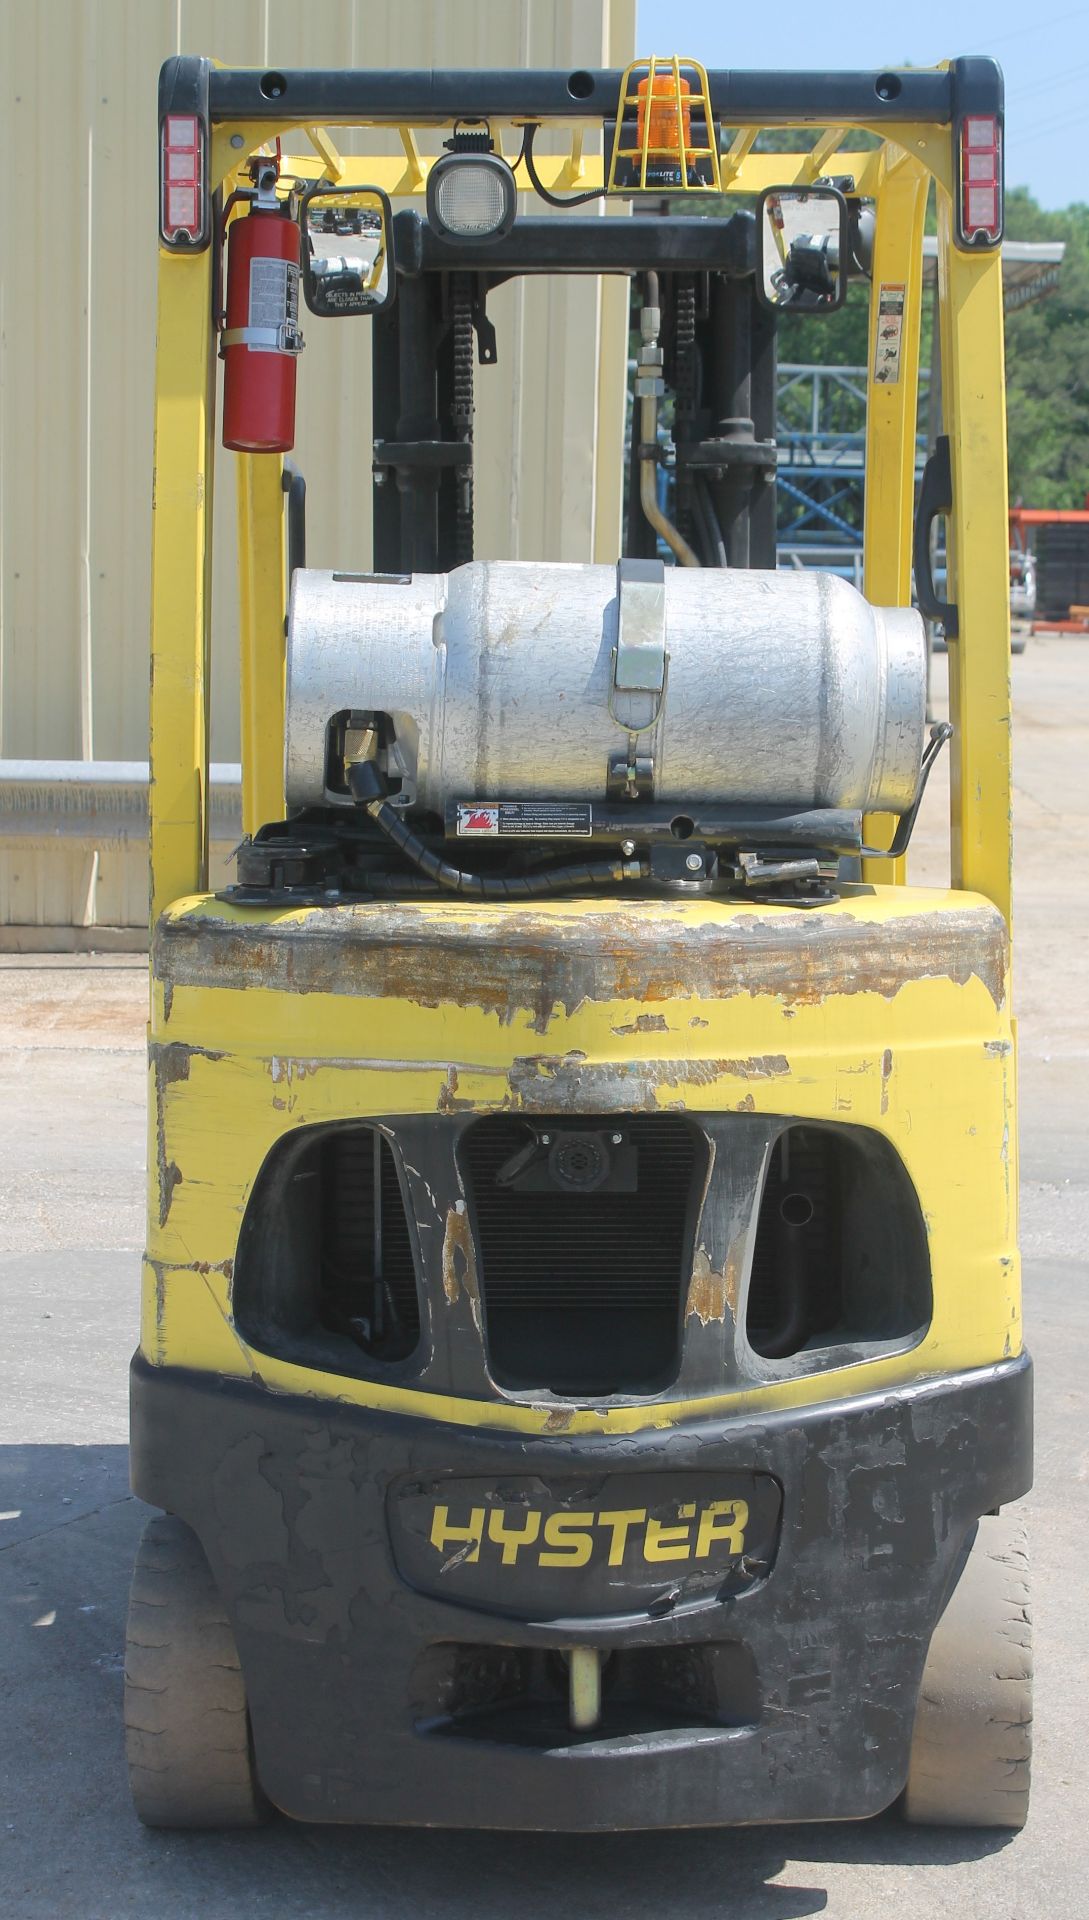 2012 HYSTER 5000 LB CAPACITY PROPANE FORKLIFT, 3 STAGE MAST (CHECK VIDEO) - Image 6 of 6